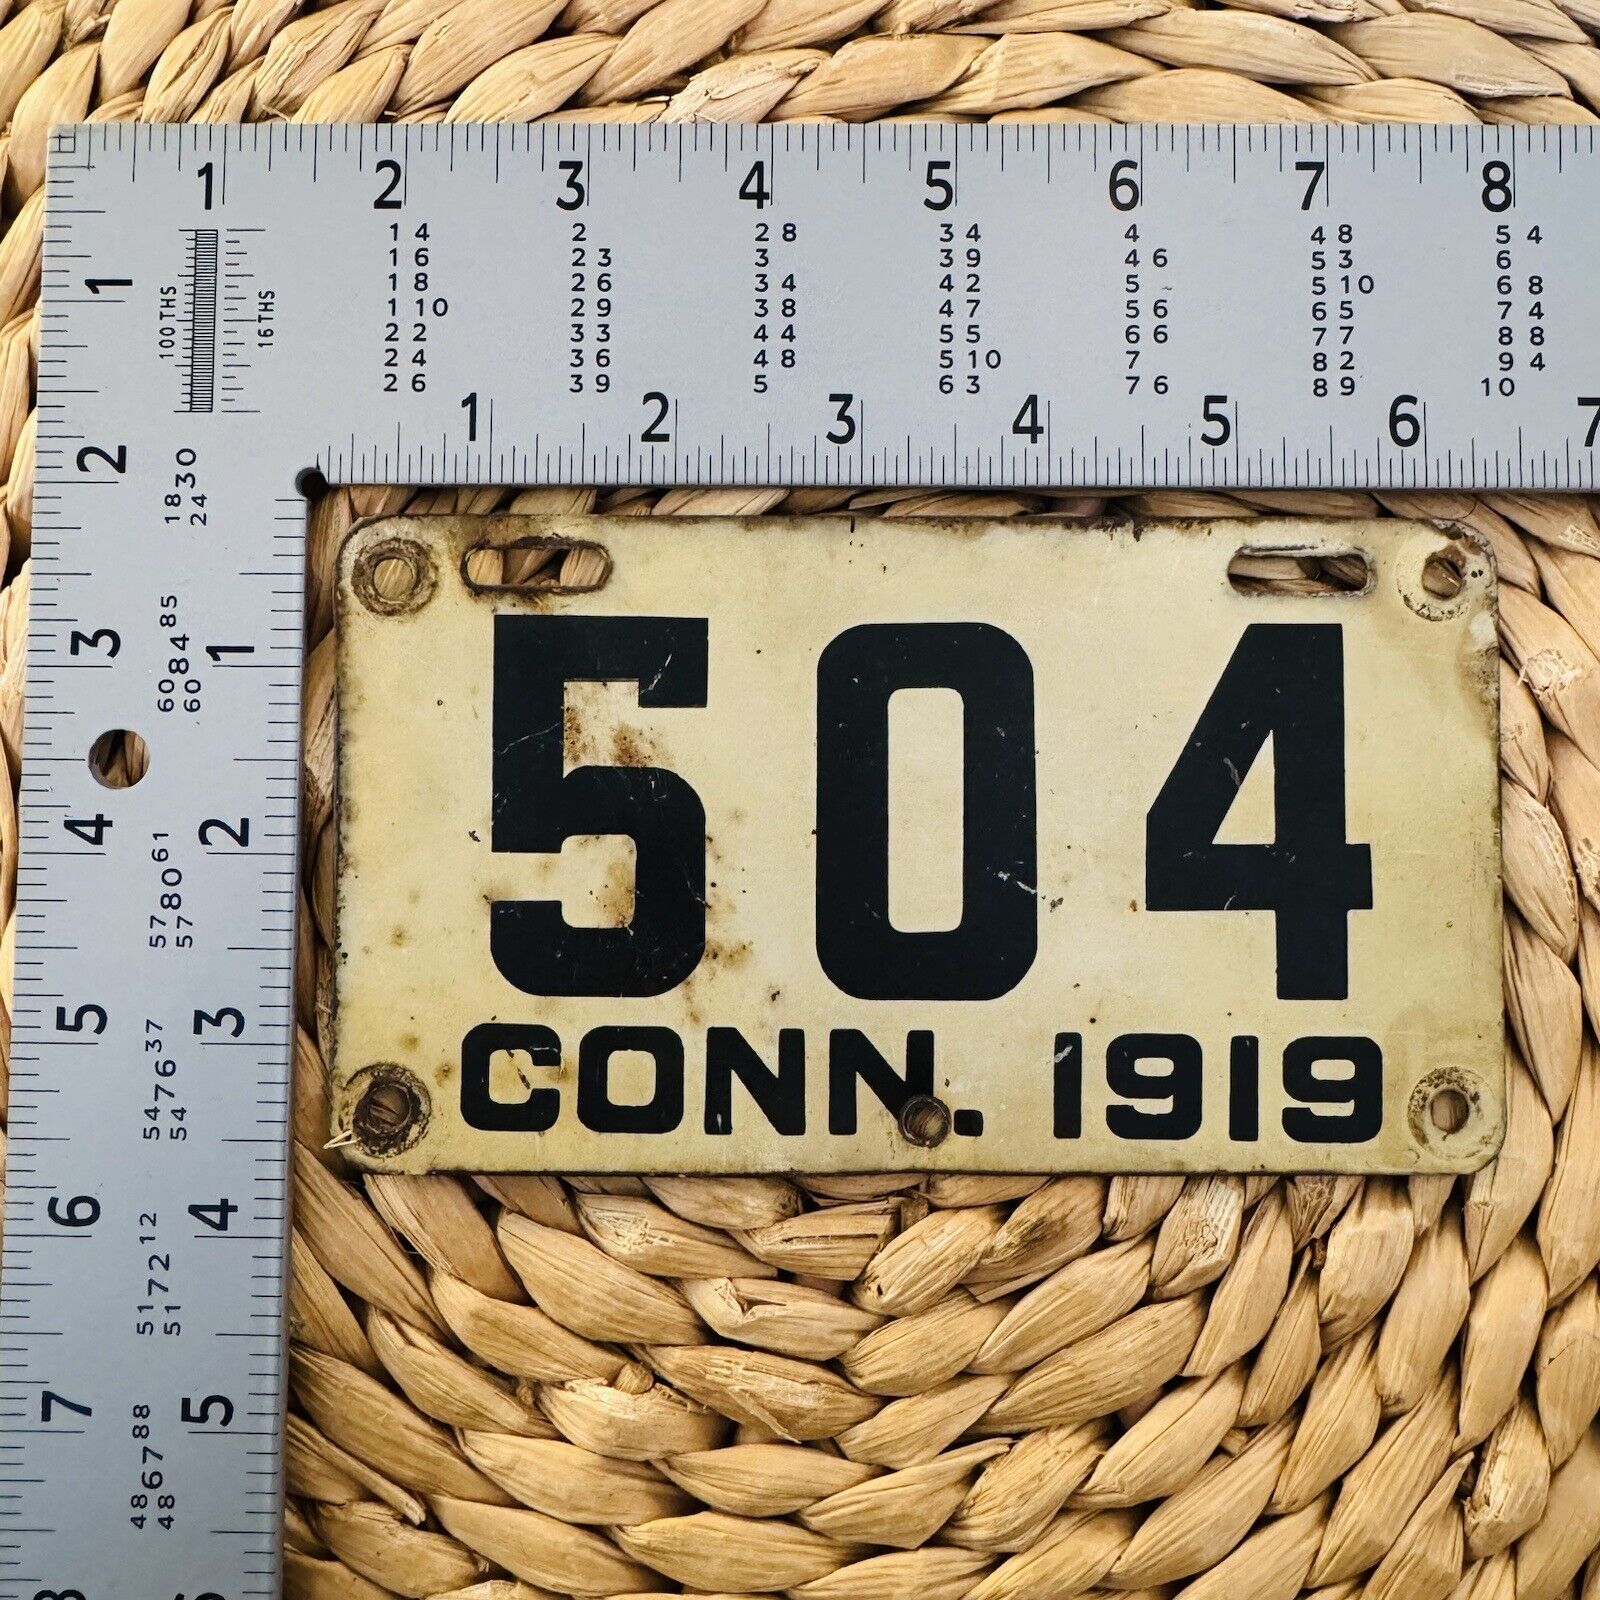 1919 Connecticut License Plate 504 MOTORCYCLE ALPCA Harley Indian BMW Norton